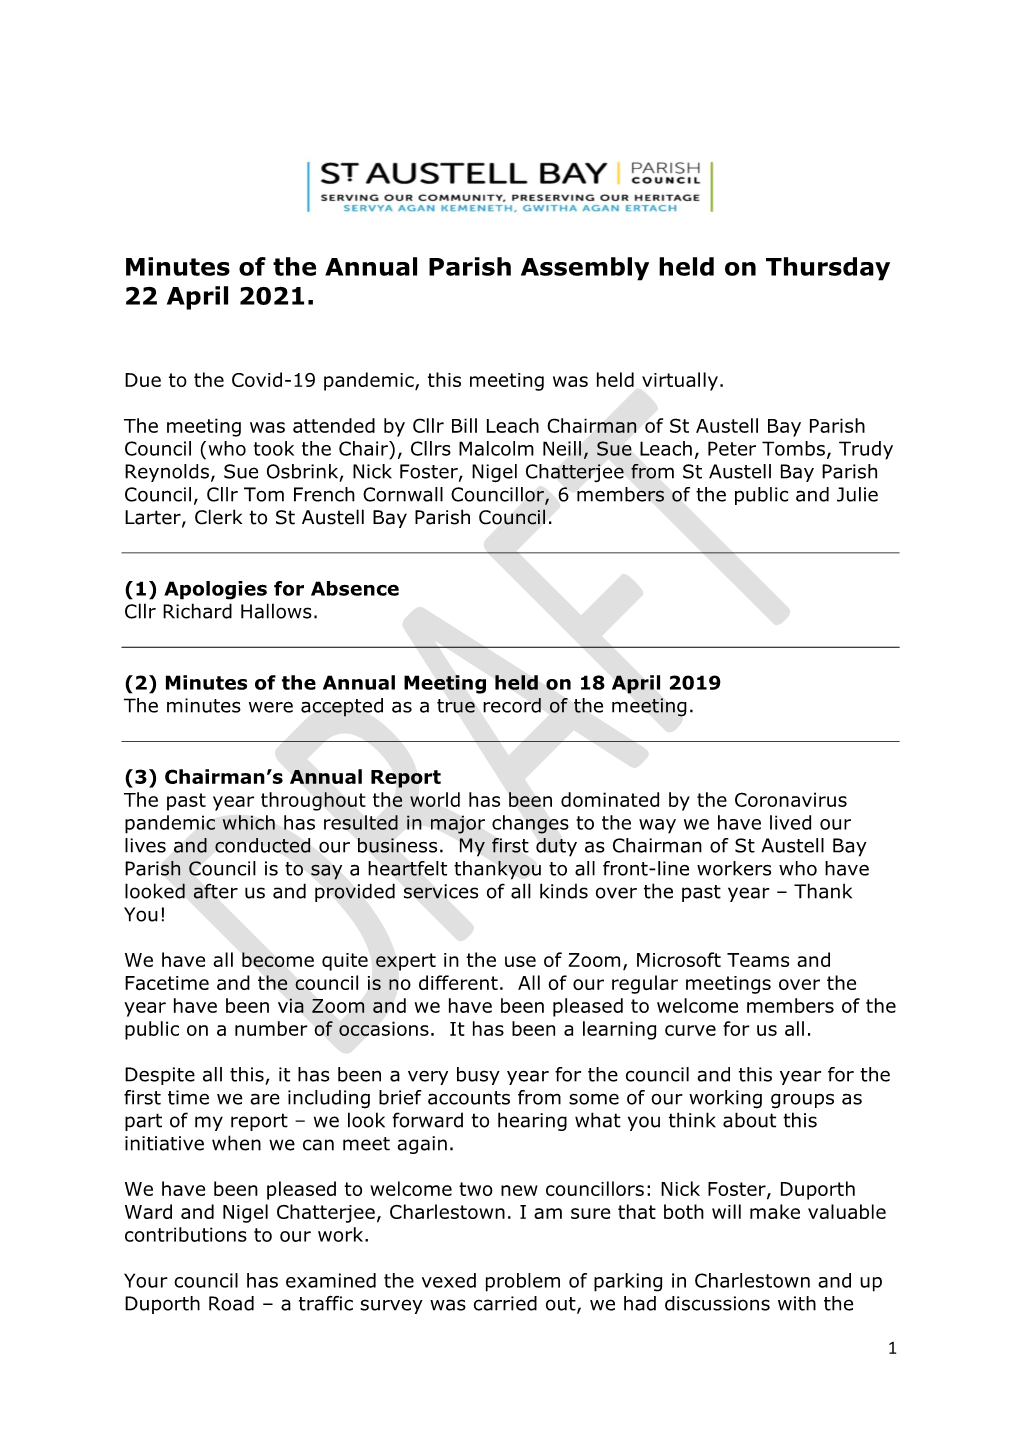 Minutes of the Annual Parish Assembly Held on Thursday 22 April 2021